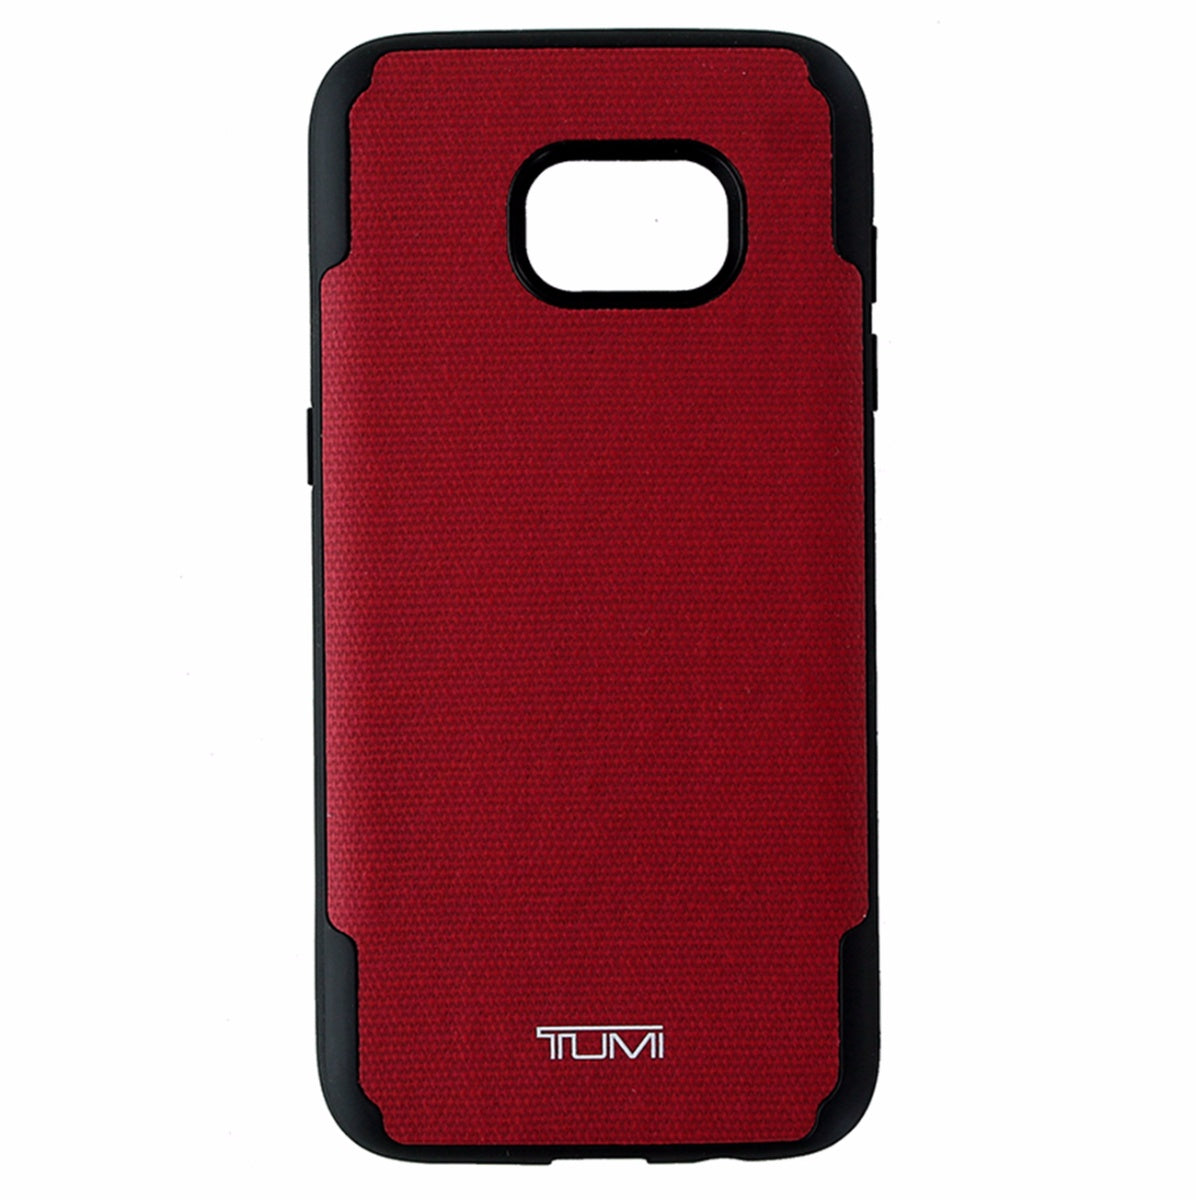 TUMI Coated Canvas Co-Mold Protective Case for Samsung Galaxy S7 edge - Red